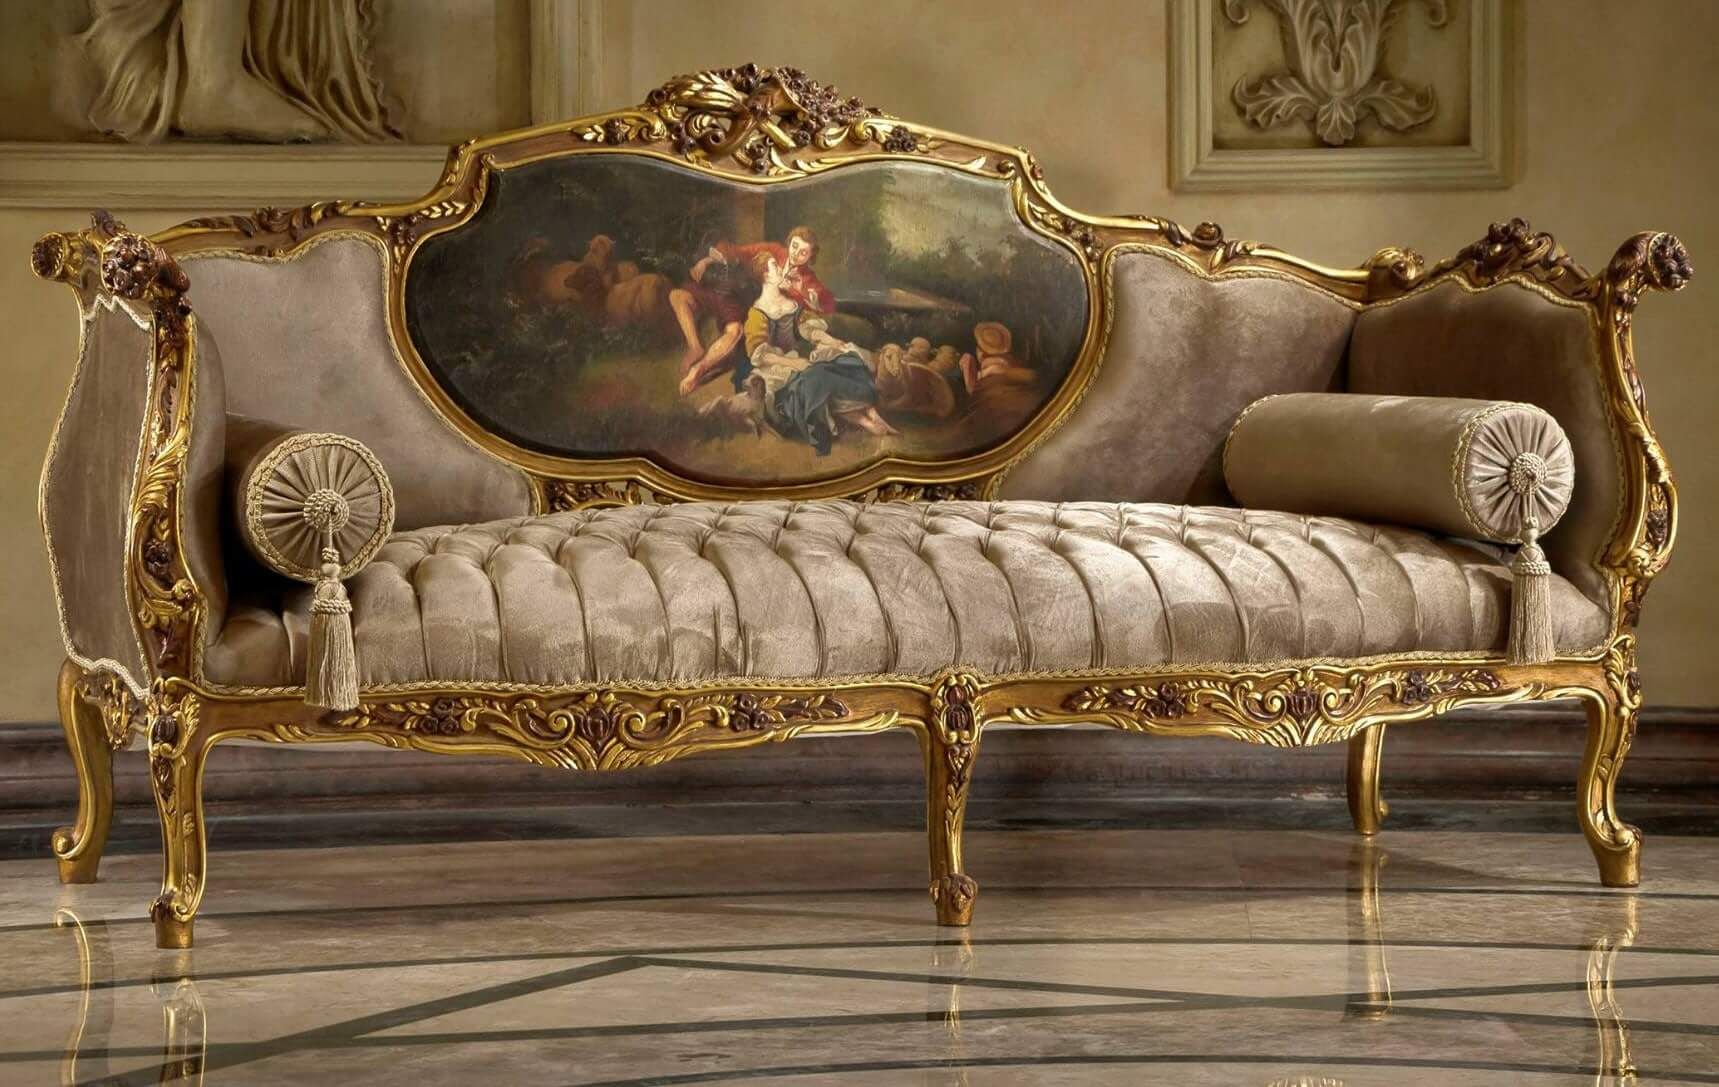 Seating French Furniture | Salon Set | Love Seat | Sofa | Arm Chair | Banquette | Chaise Lounge